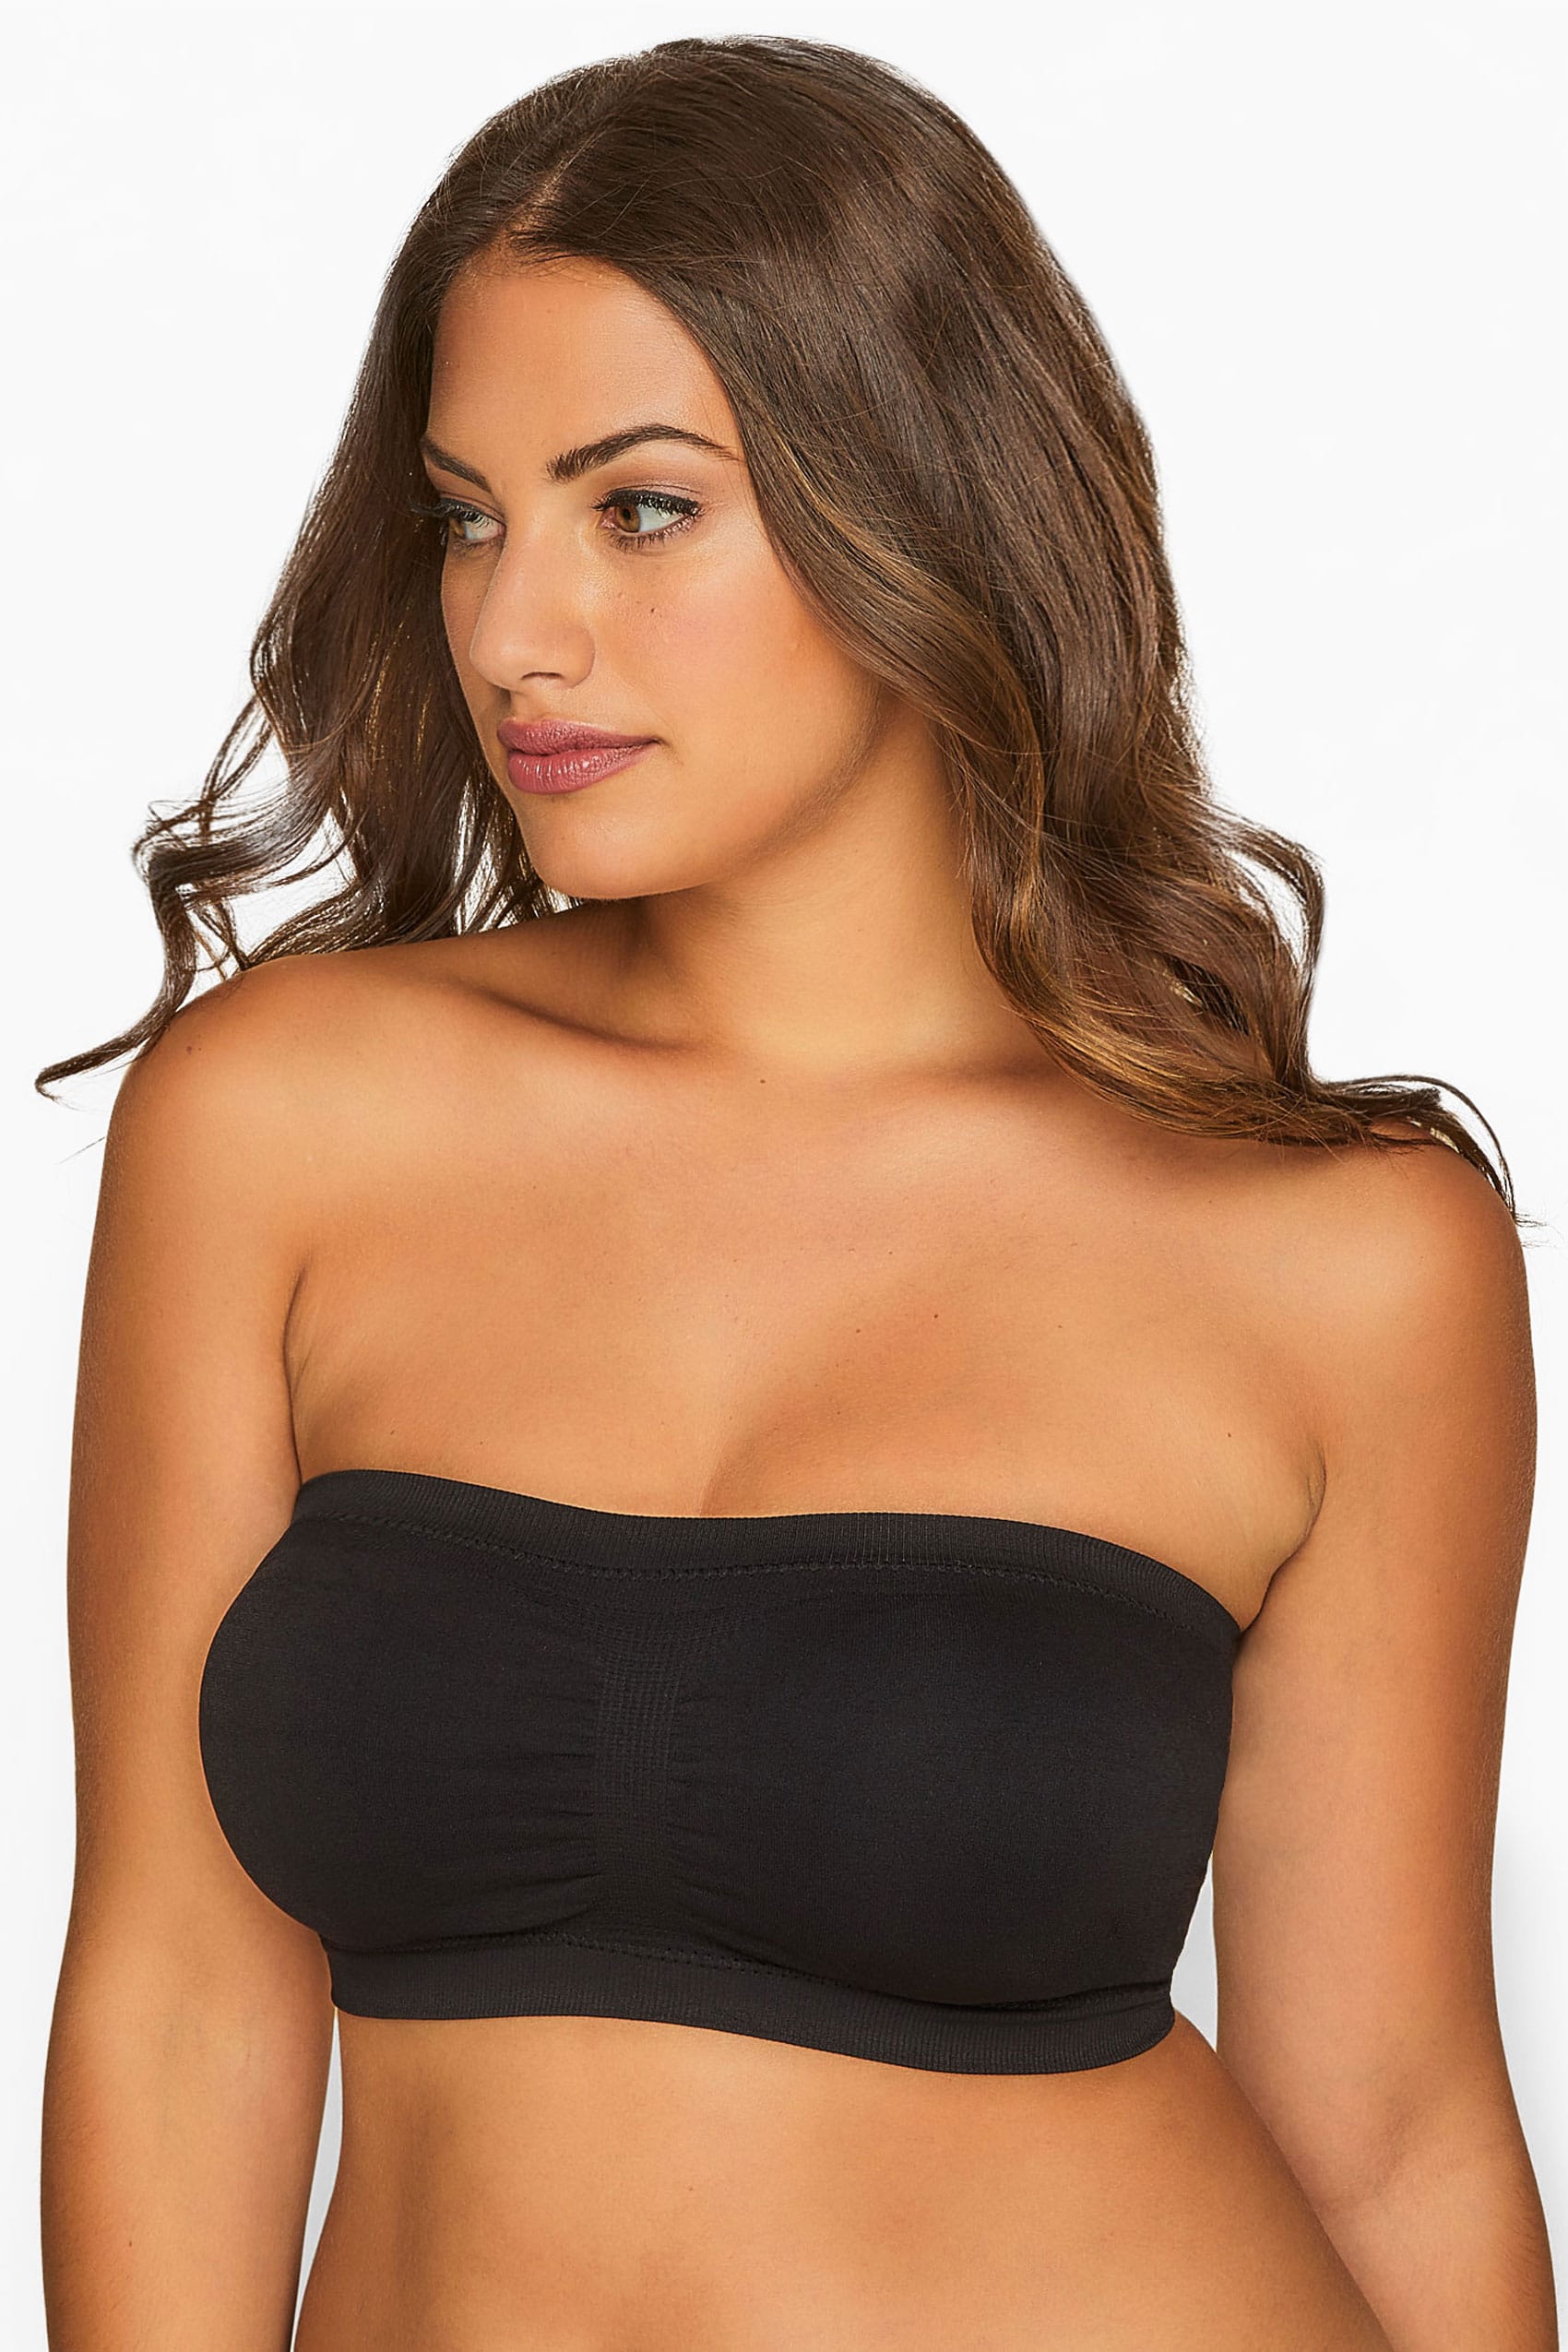 Coerni 3 Pieces Strapless Bandeau Bra for Women Plus Size Seamless Bralettes Stretchy Removable Padded Bandeau Tube Top Bra 